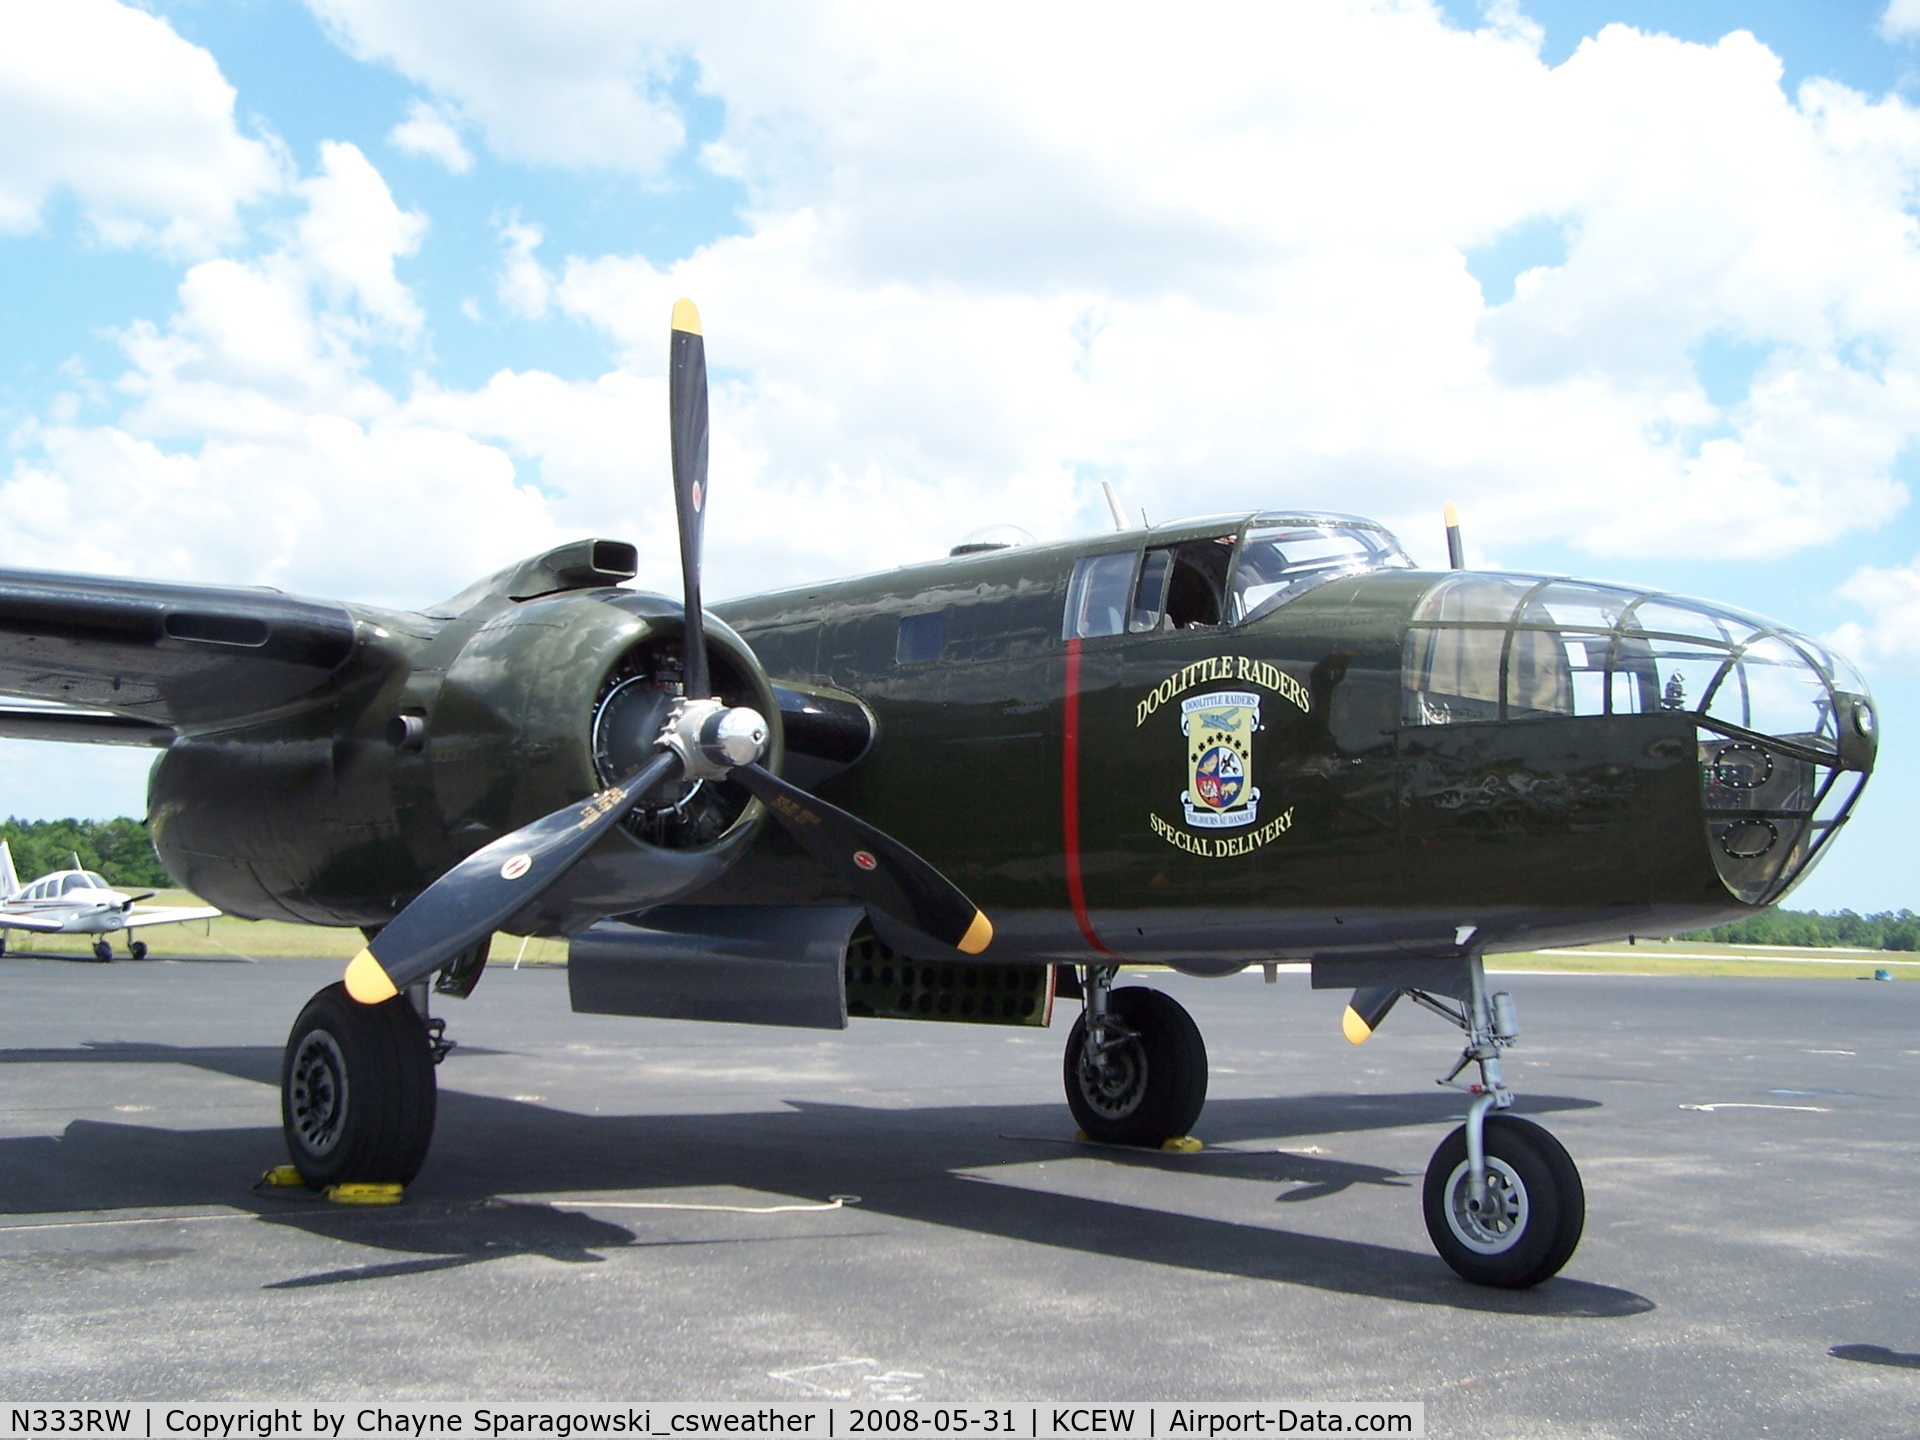 N333RW, 1944 North American B-25N Mitchell C/N 108-47488, 'Special Delivery' sitting parked on the tarmac